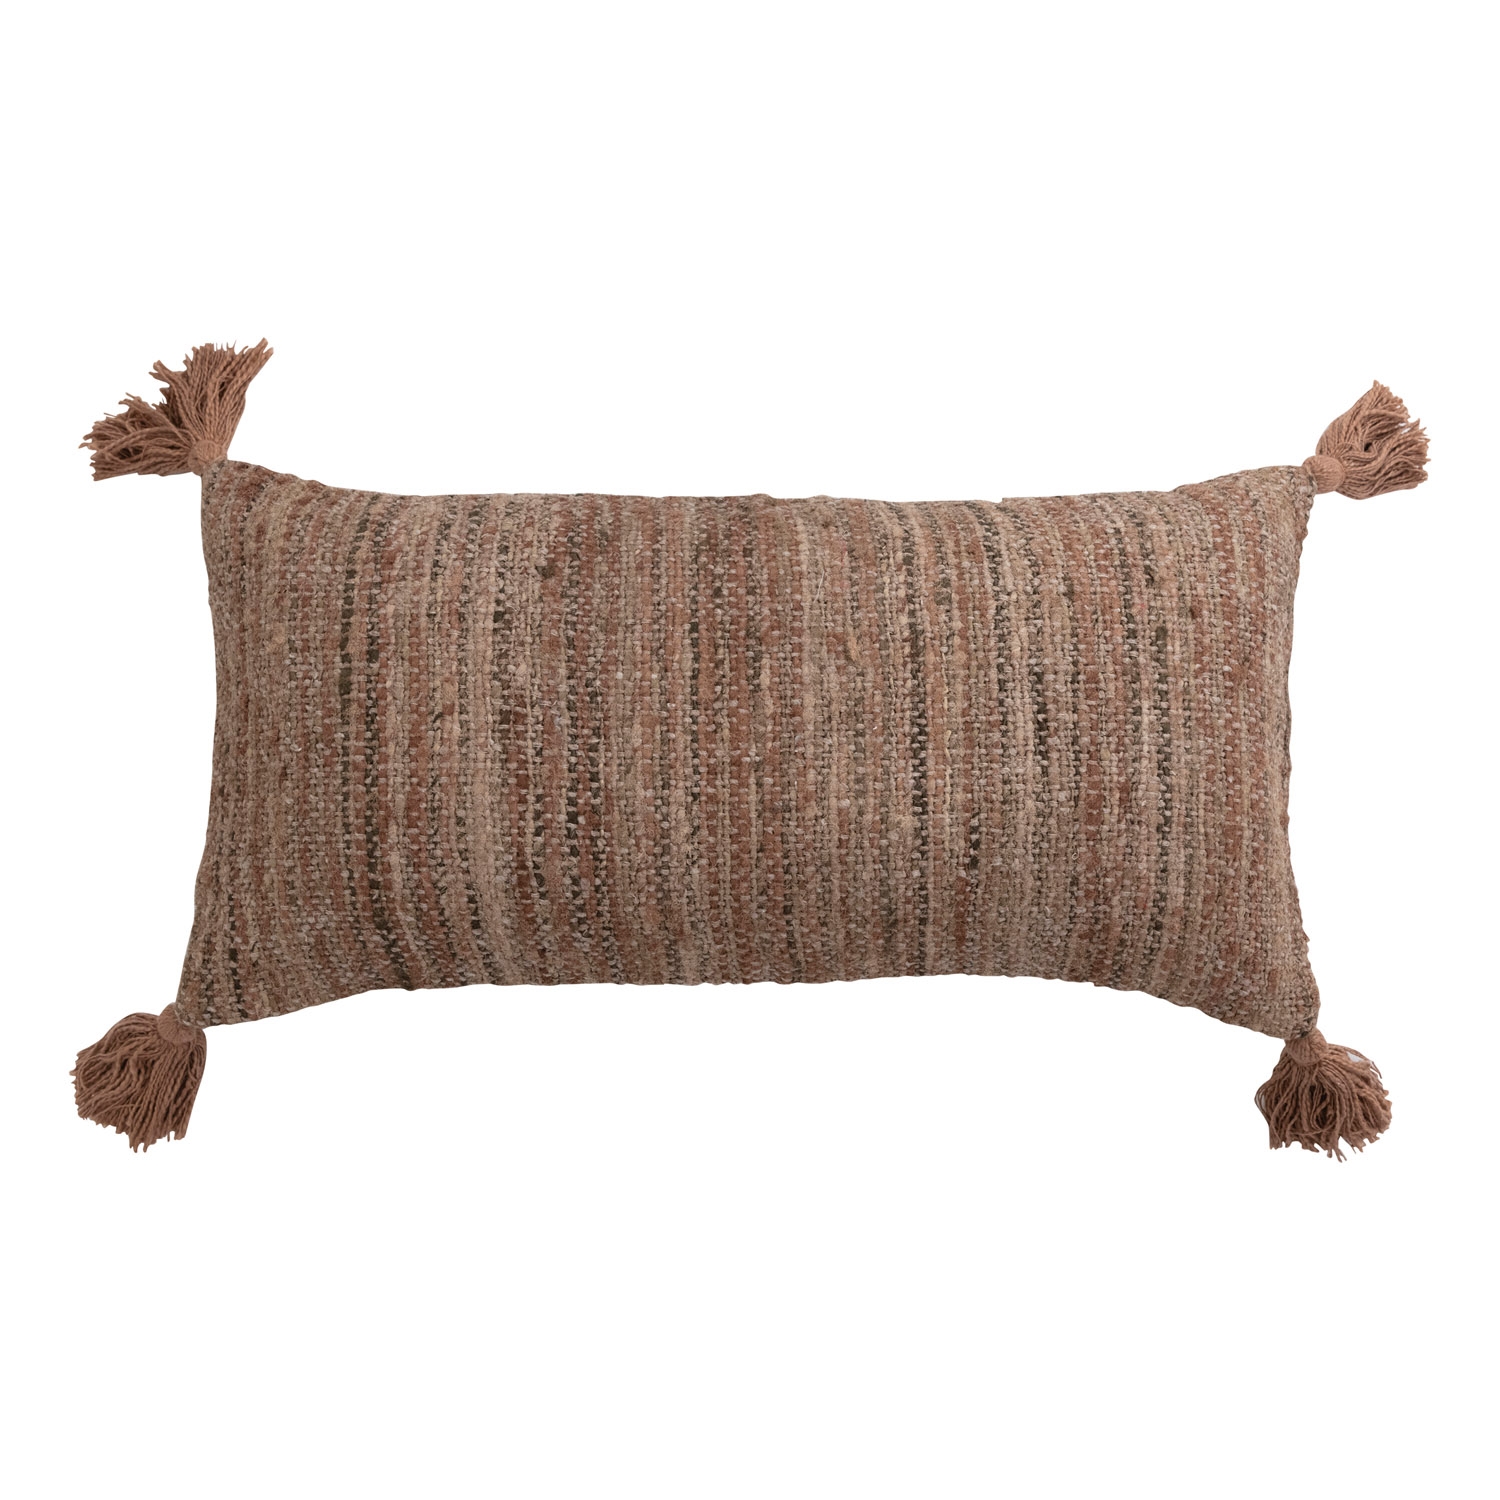 Woven Cotton Striped Lumbar Pillow with Chambray Back and Tassels - Image 0